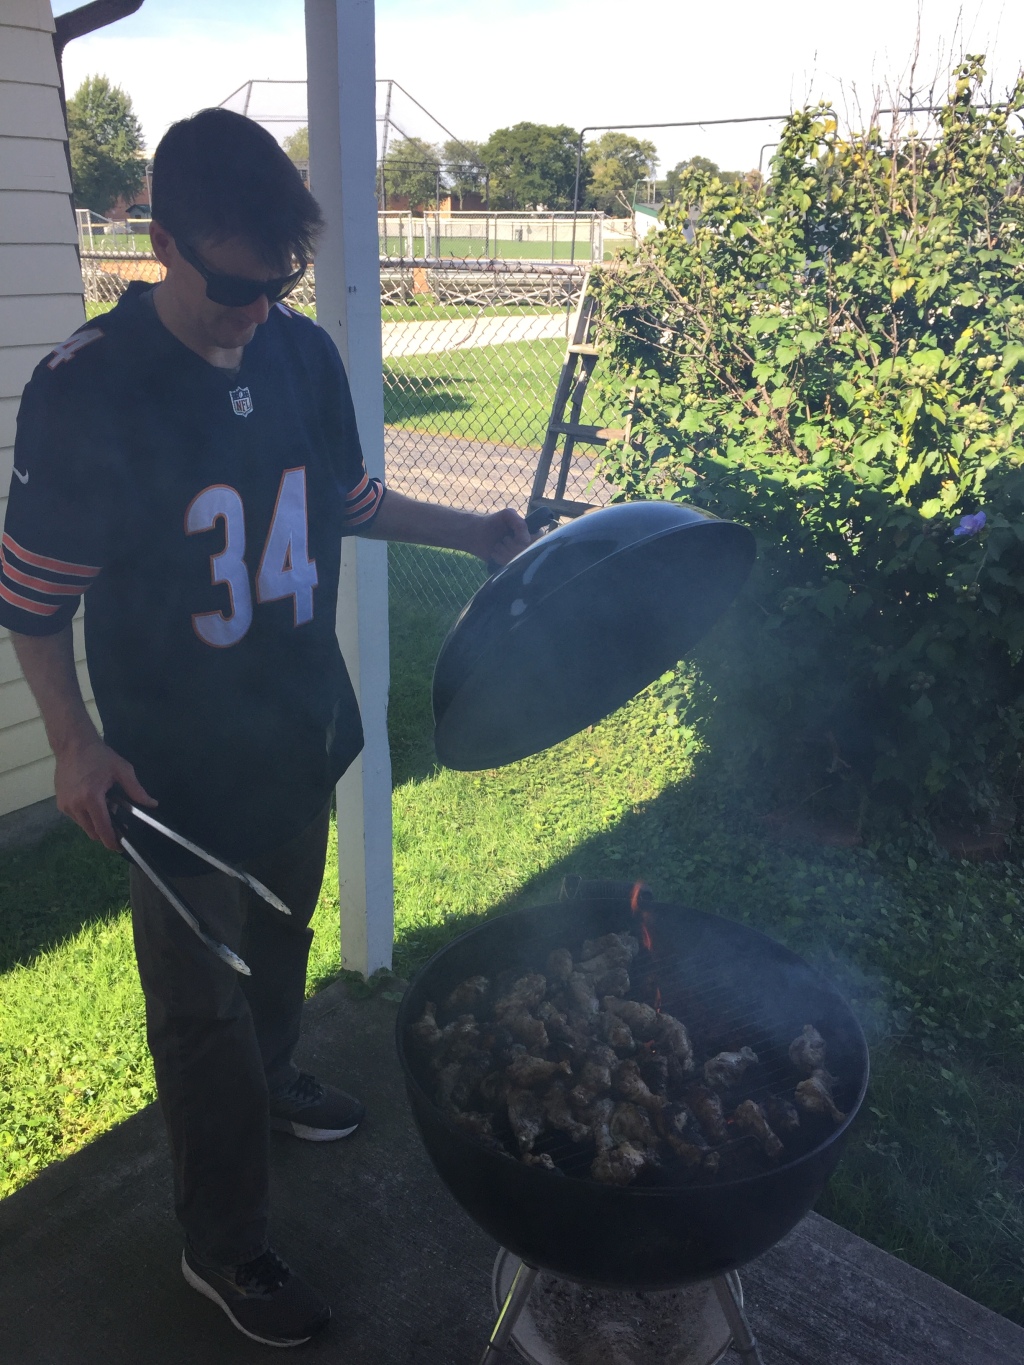 Dropped the Brisket at Bears Watch Party